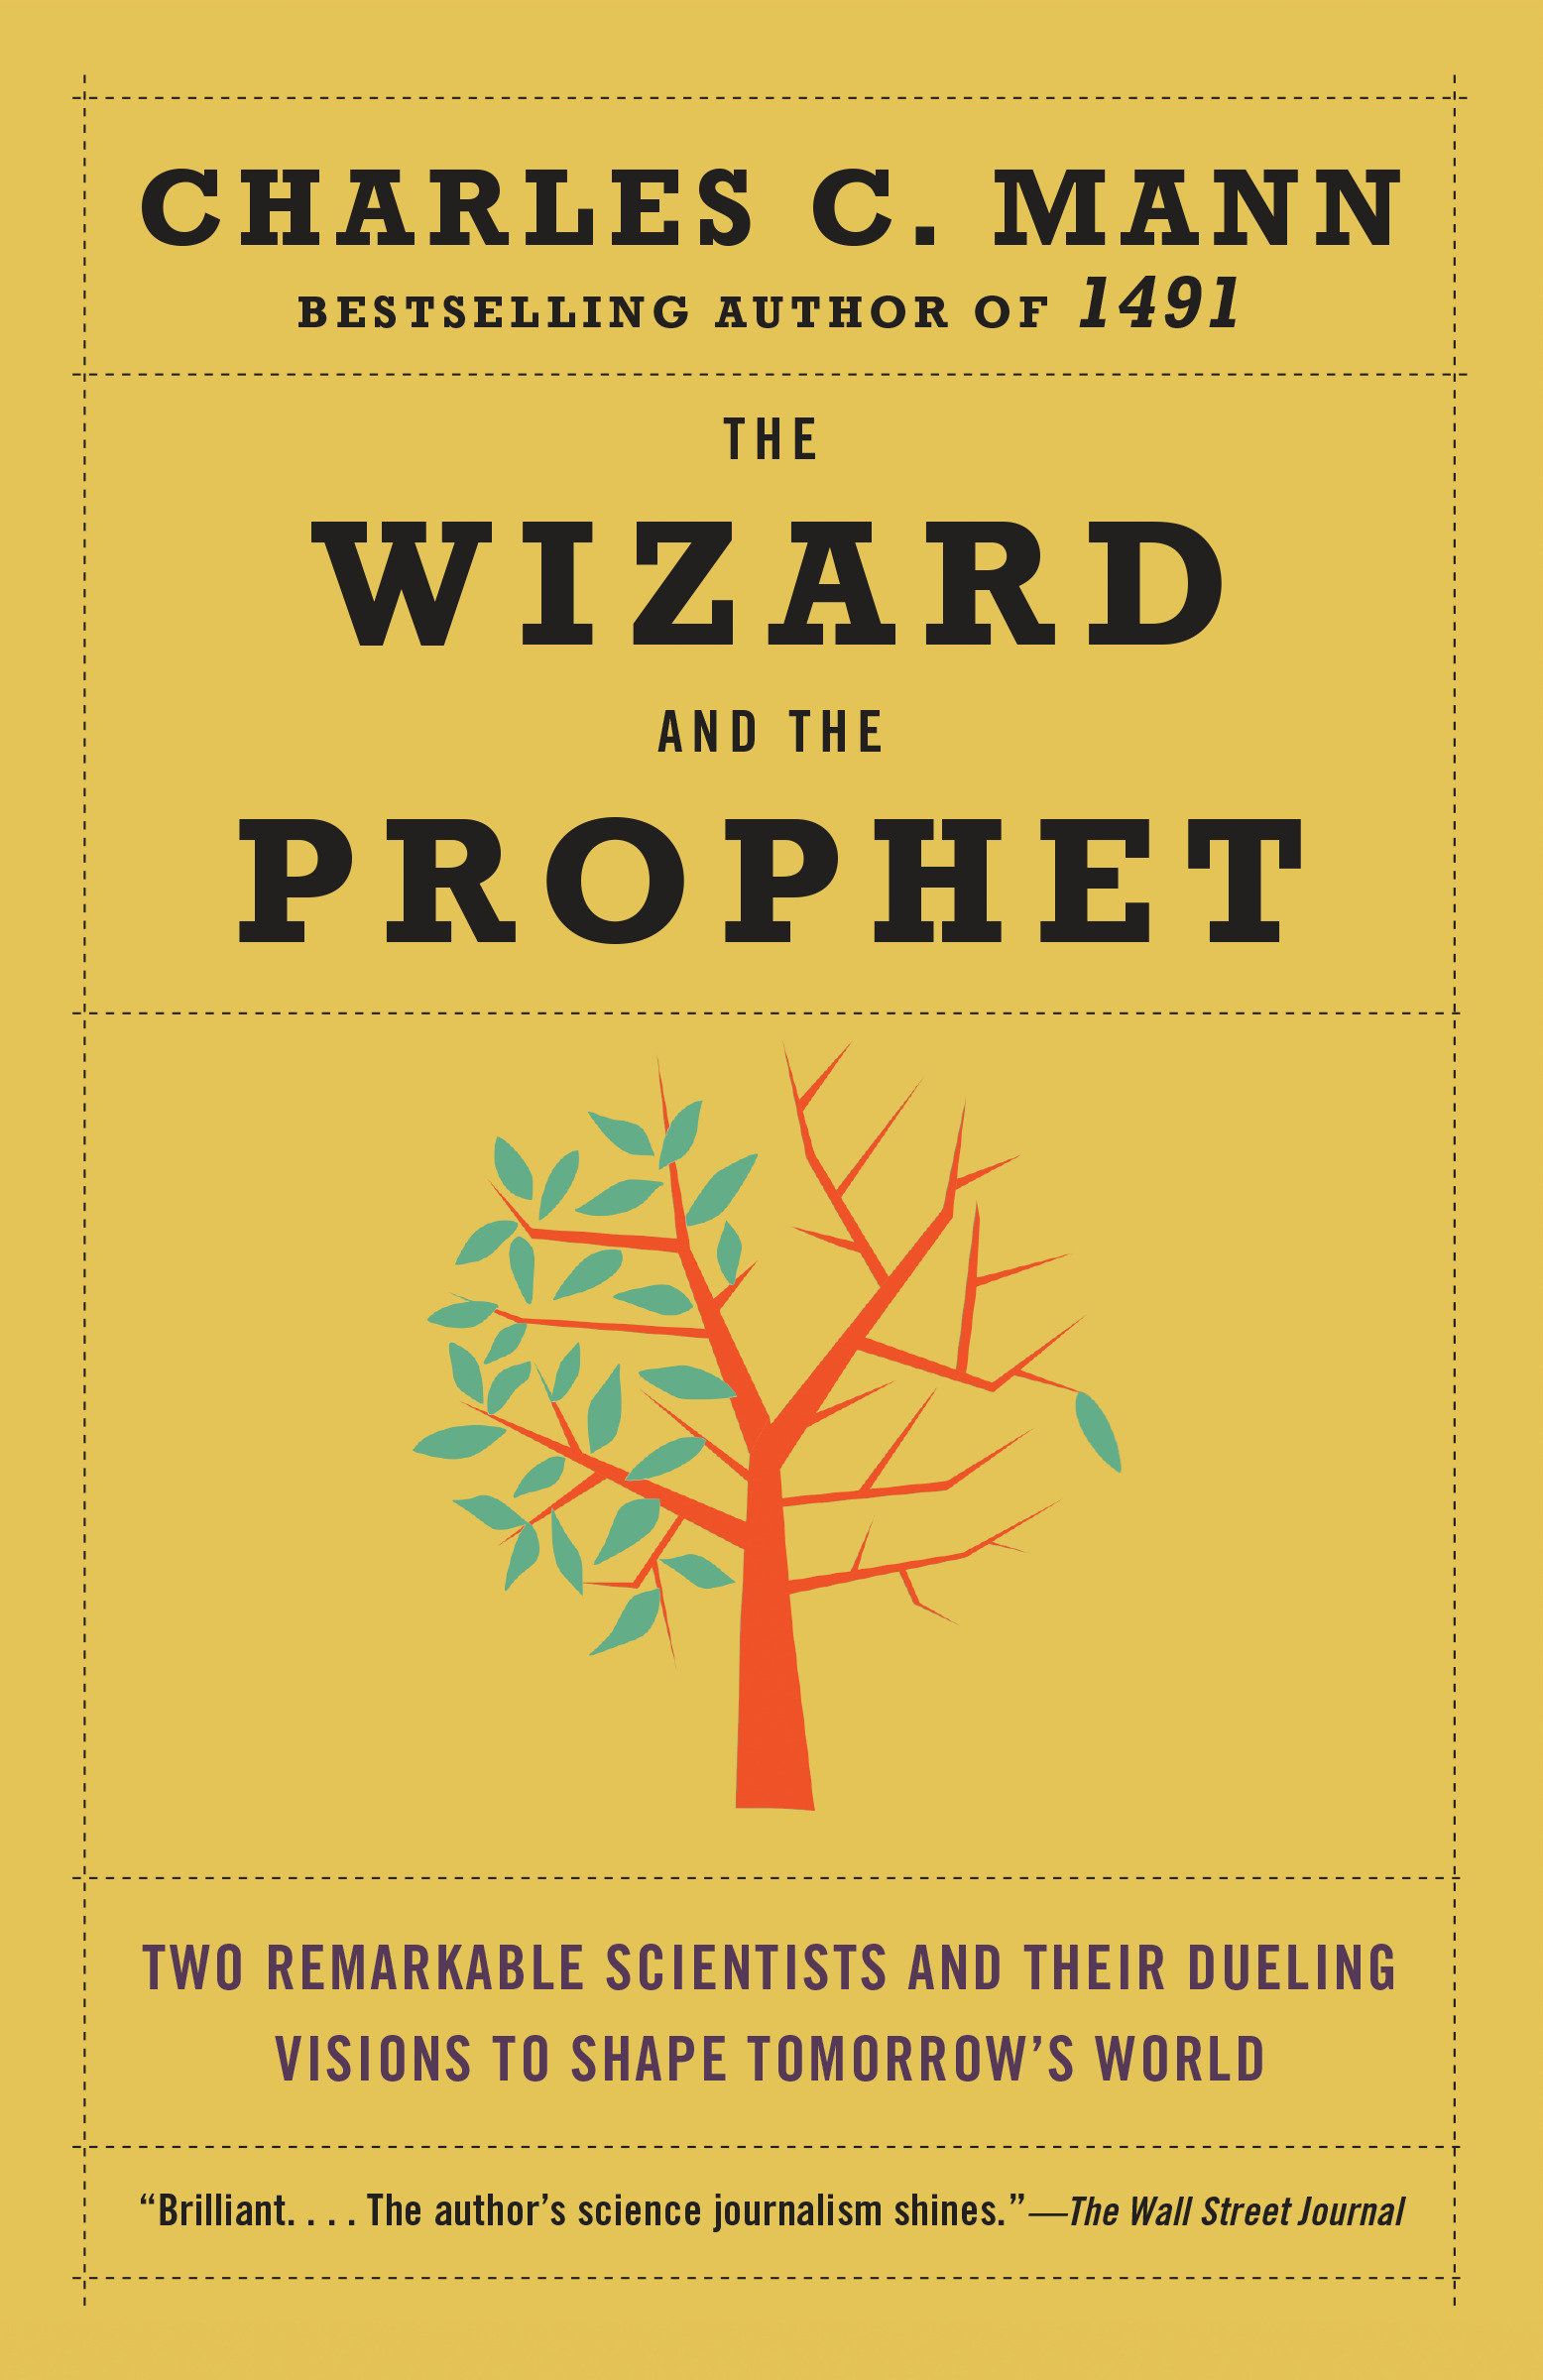 Image de couverture de The Wizard and the Prophet [electronic resource] : Two Remarkable Scientists and Their Dueling Visions to Shape Tomorrow's World